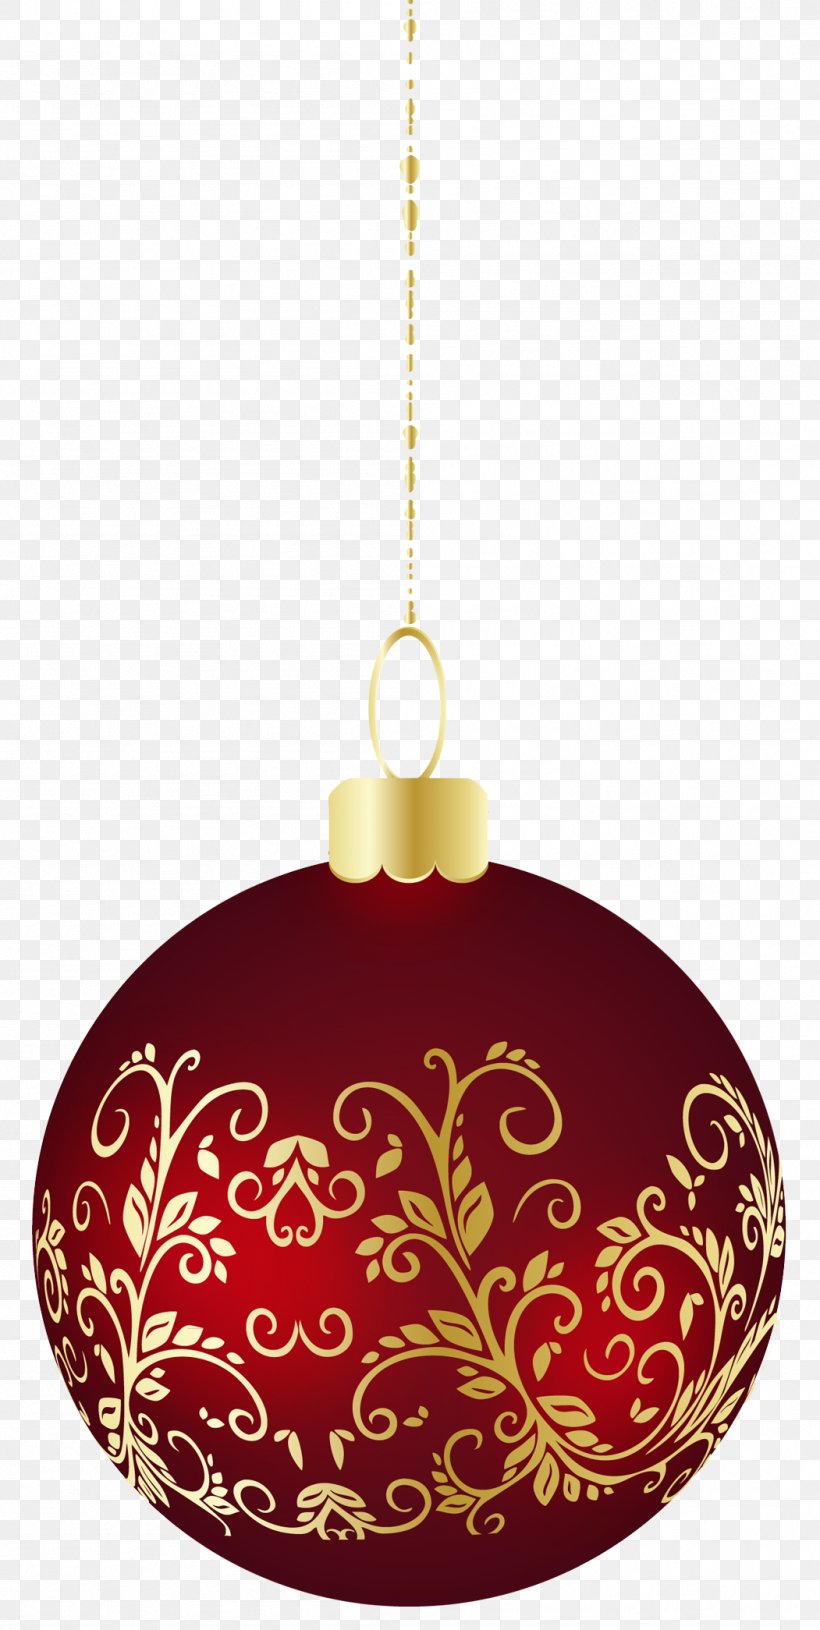 Large Transparent Christmas Ball Ornament Clipart, PNG, 1051x2090px ...